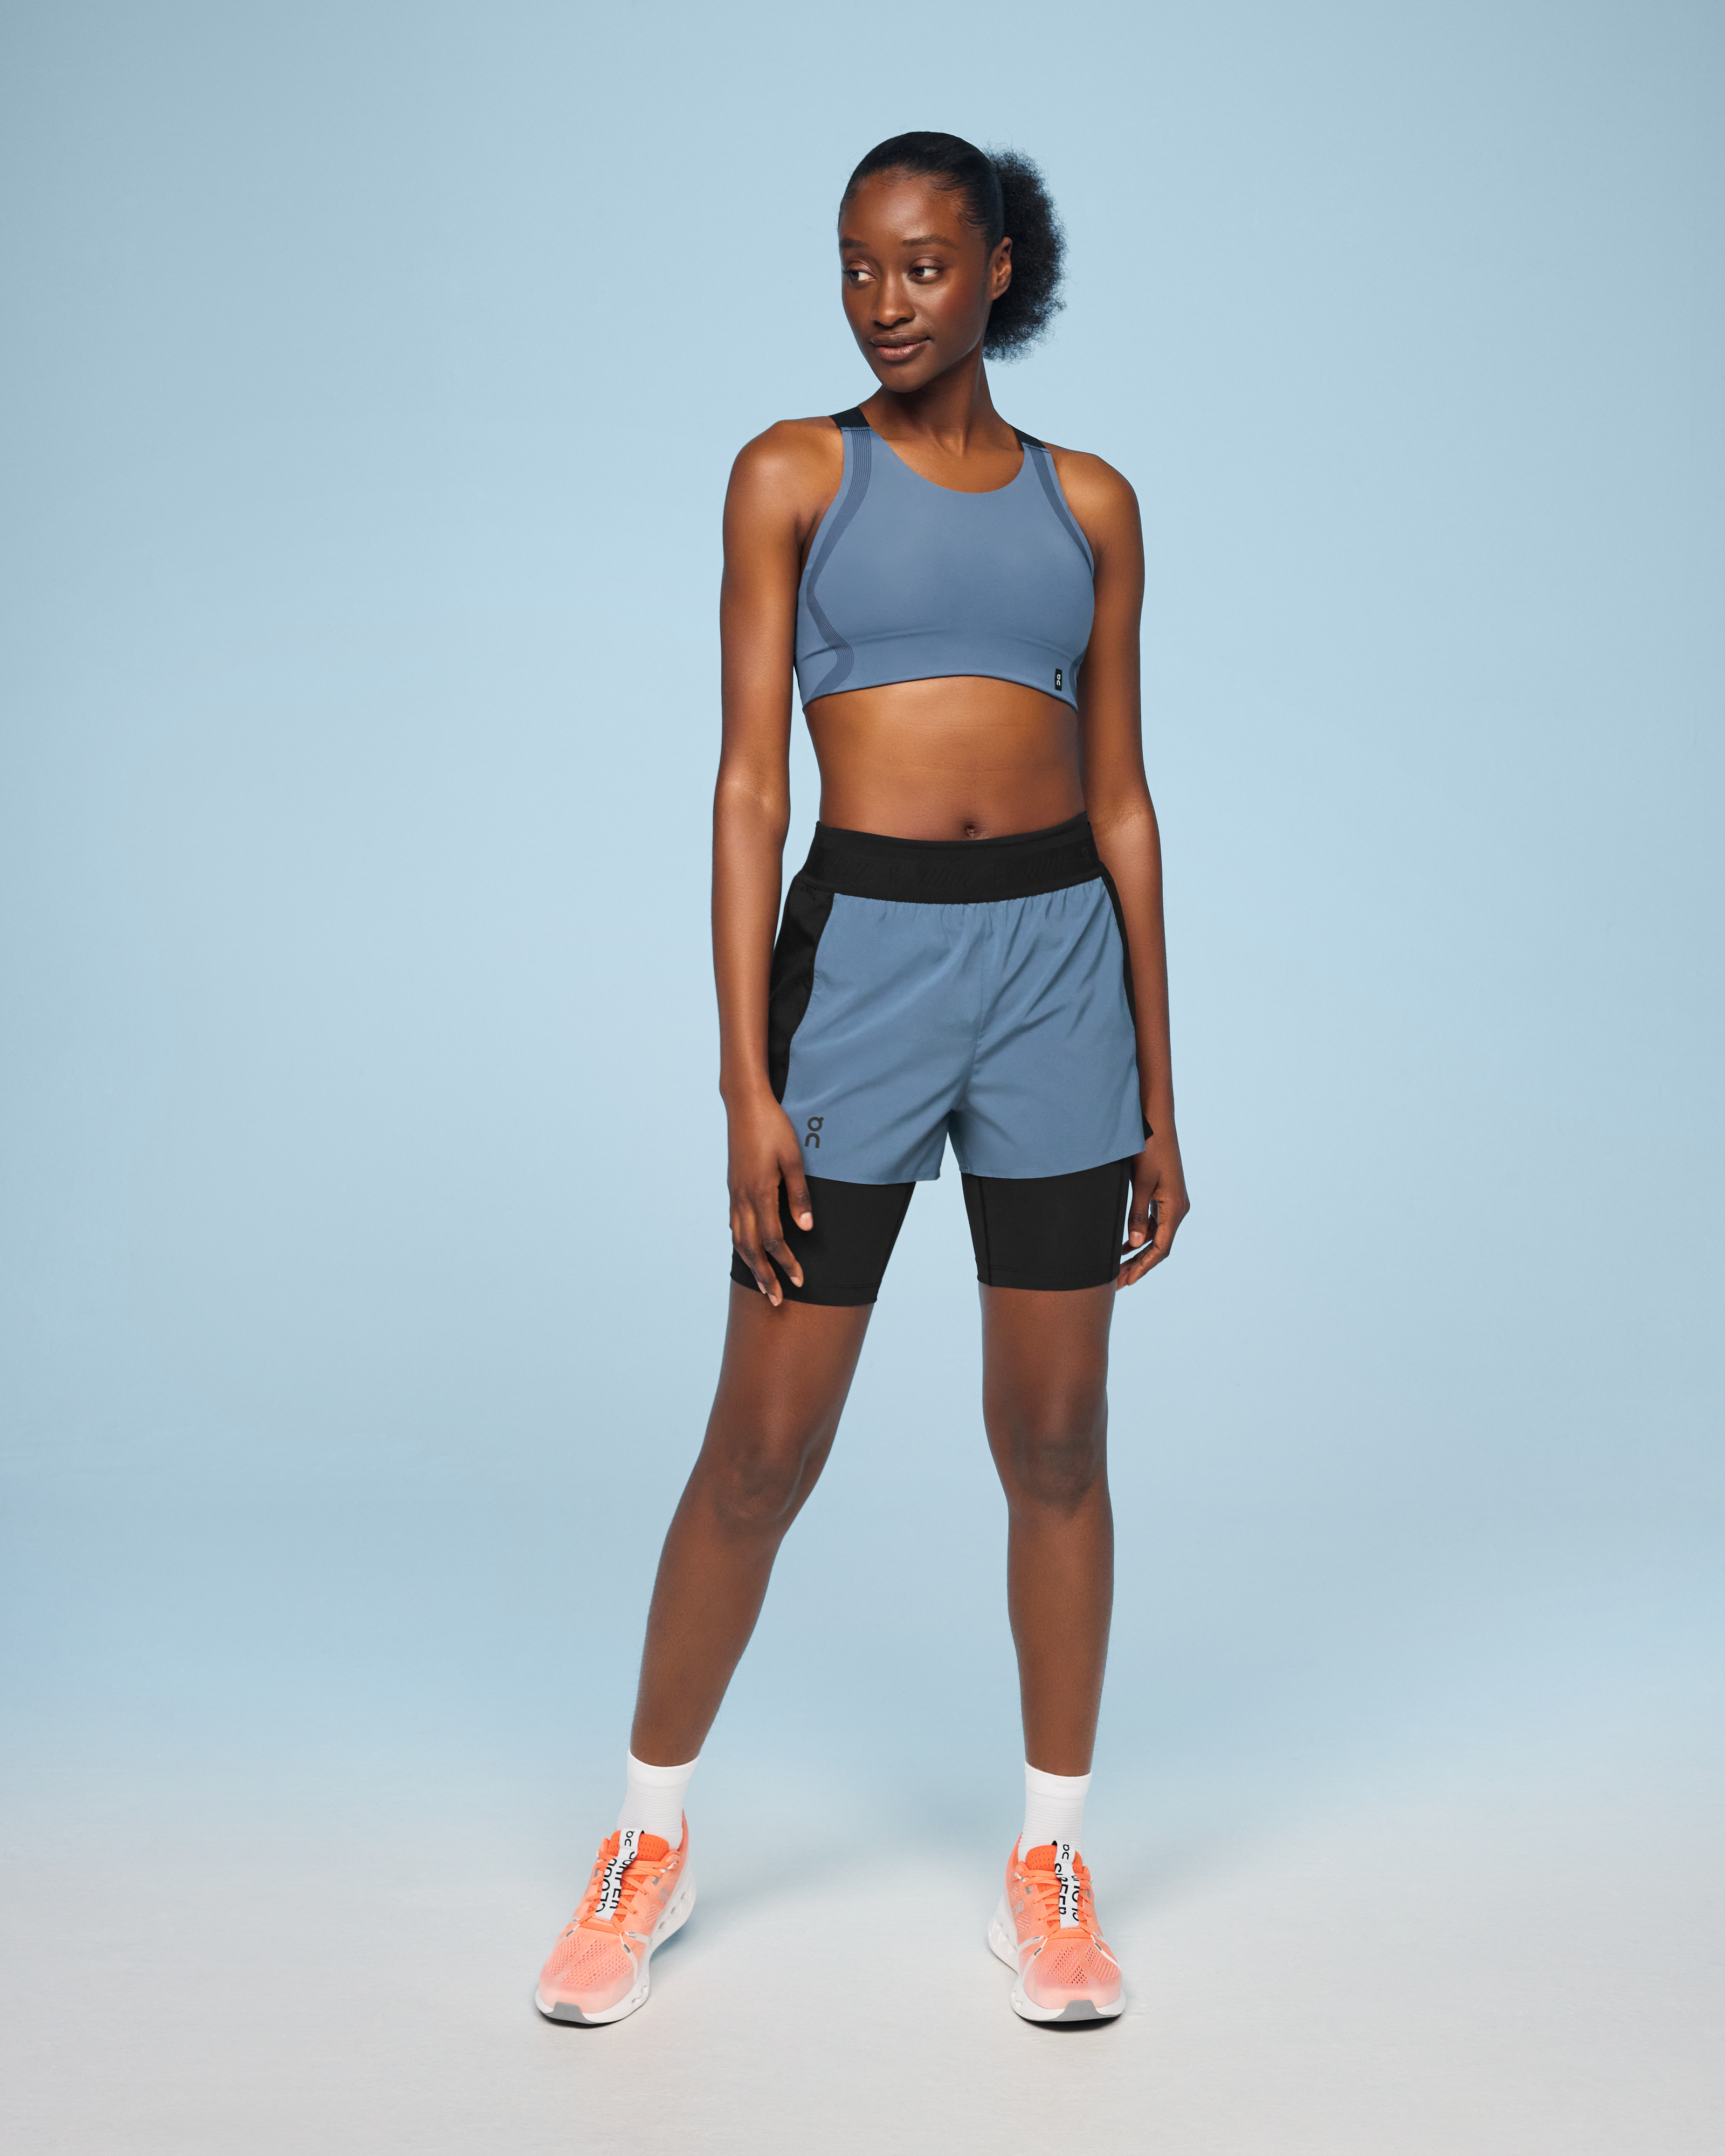 Stay Active in Style with Women's Athletic Pants and Shorts - Got